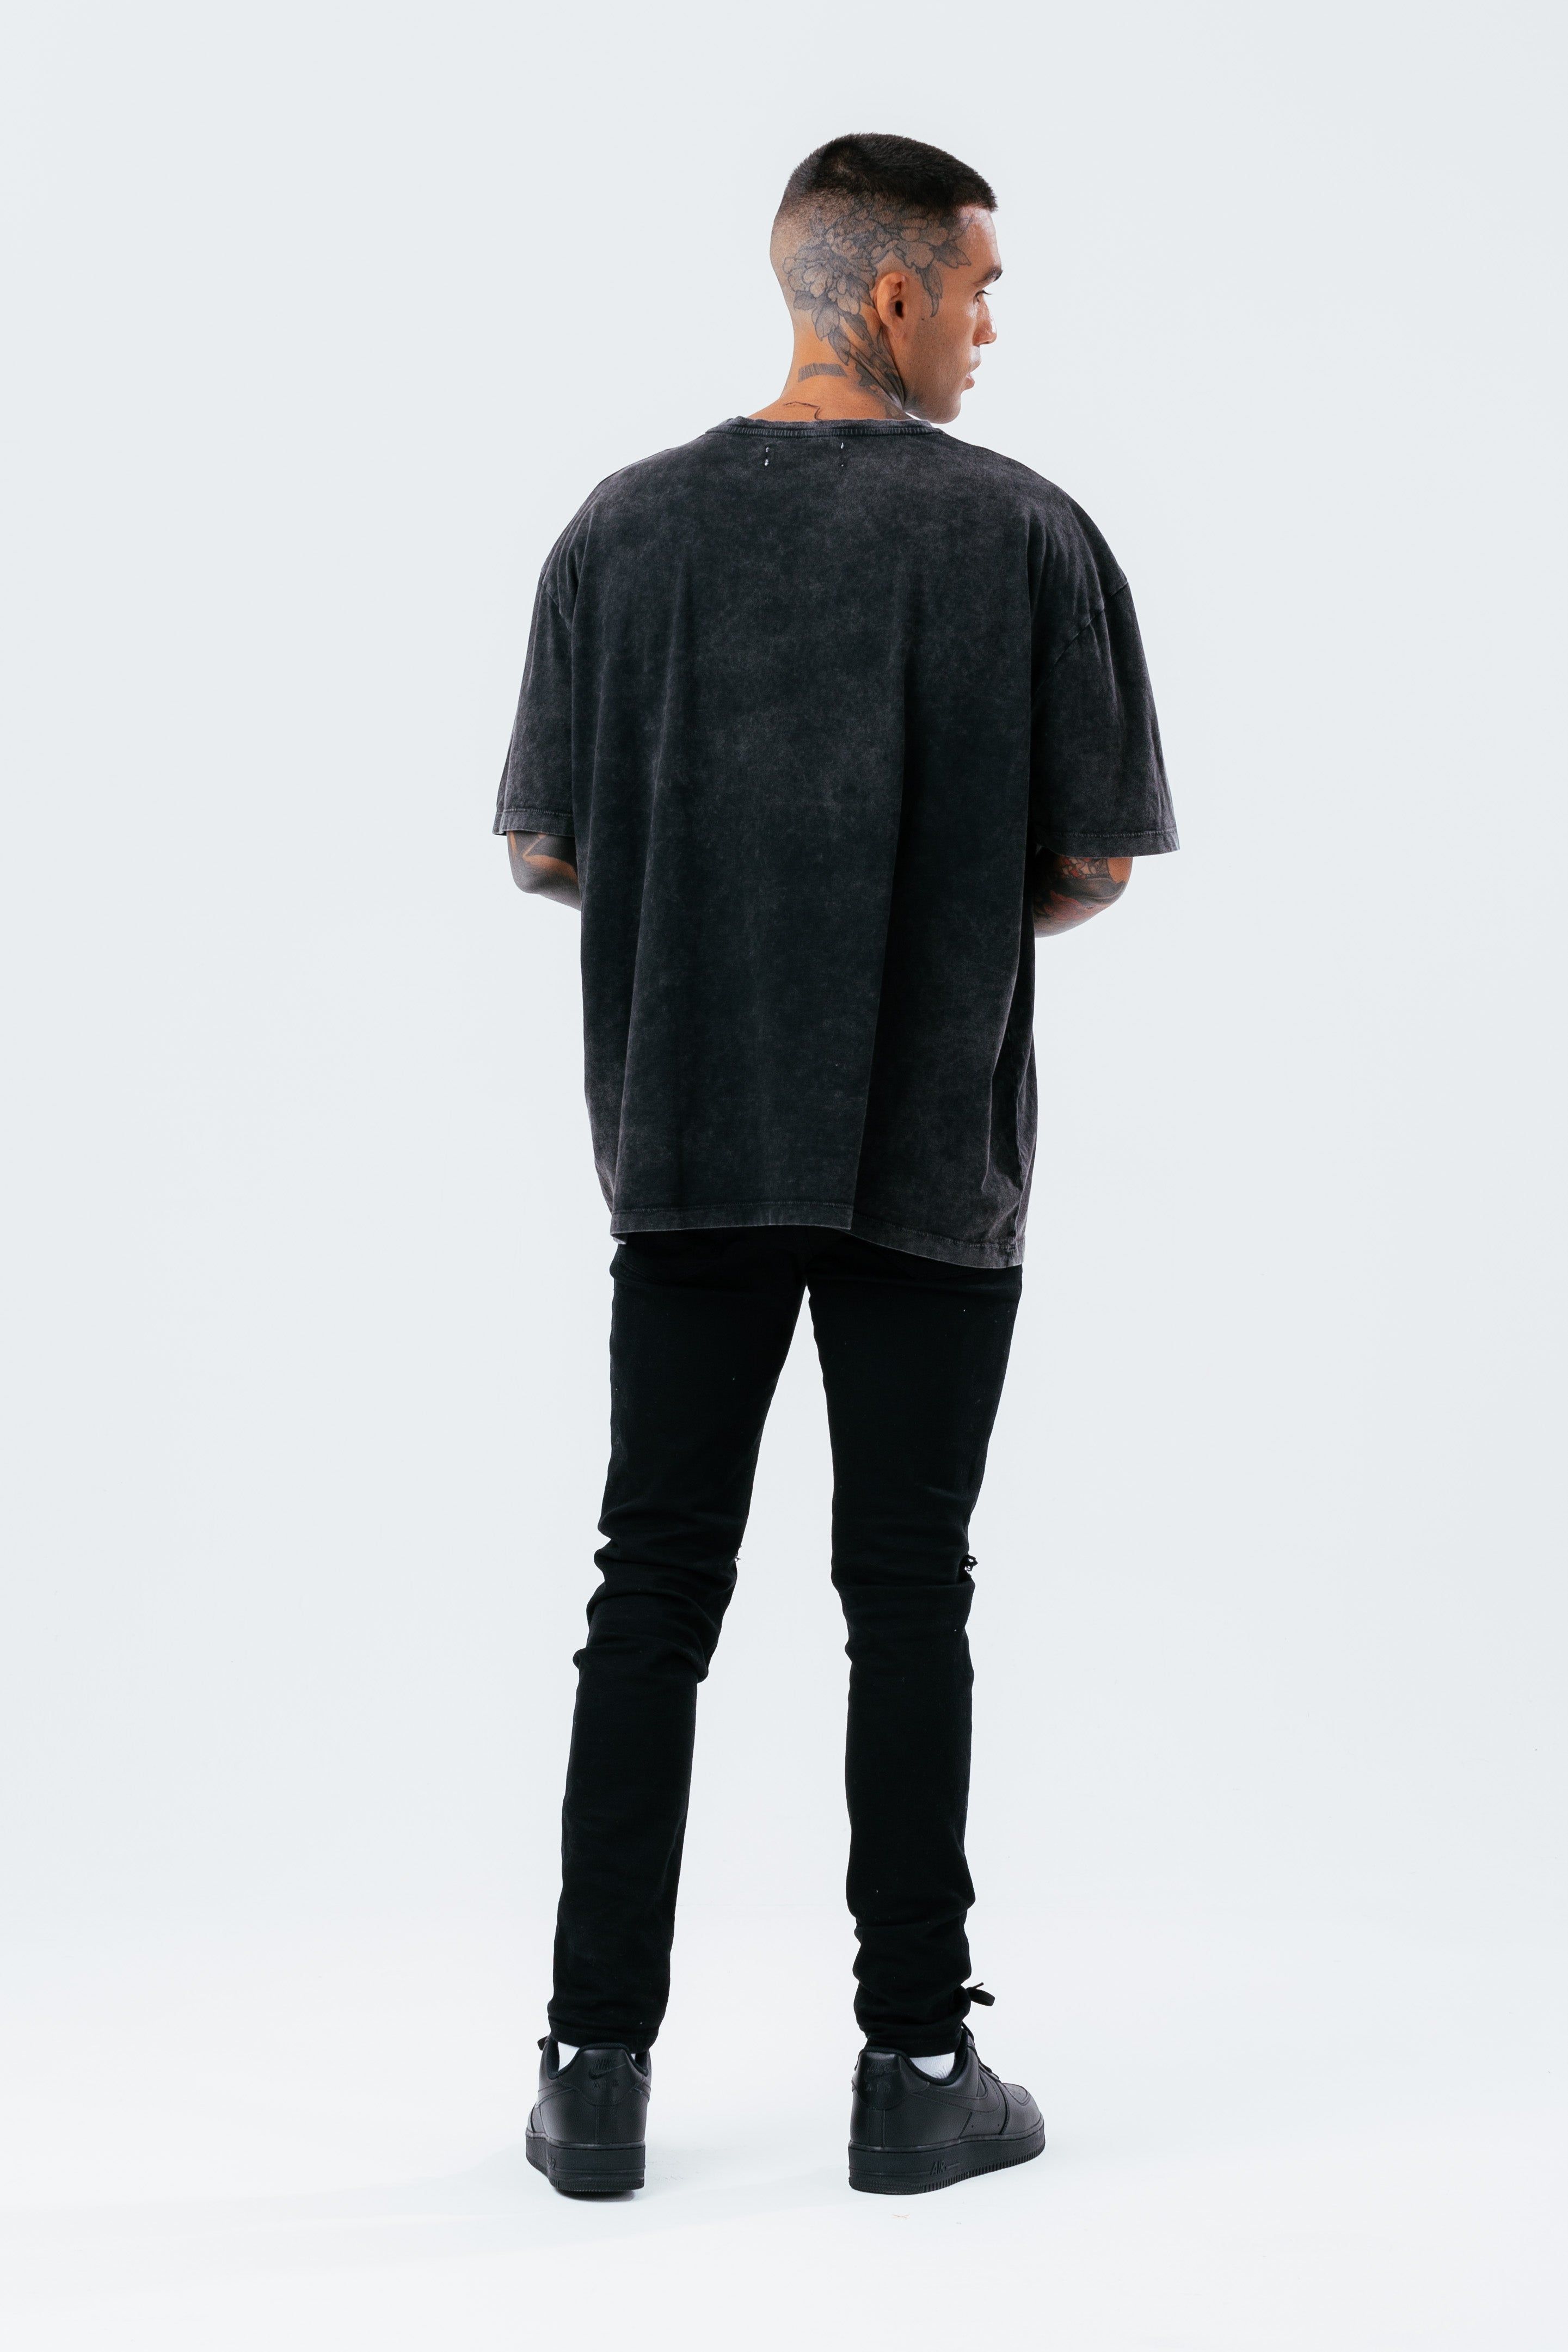 The HYPE. Men's Oversized T-shirt boasts a soft touch fabric base for supreme comfort. Designed in our oversized men's tee shape, with a crew neckline and enlarged sleeves for a trending fit. The model wears a size M. Machine washable.